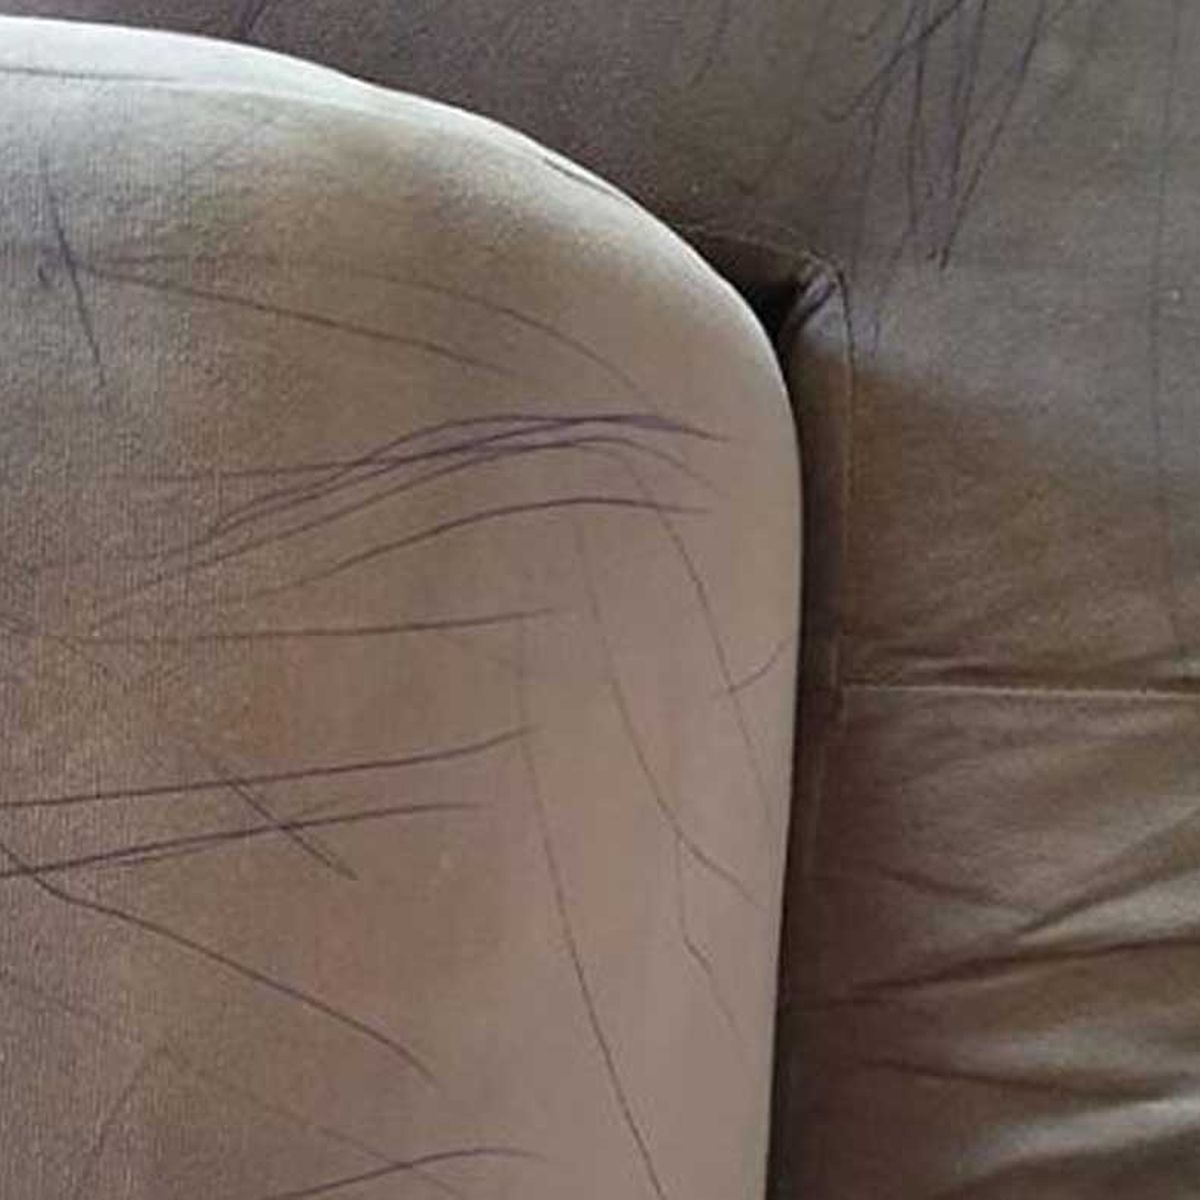 Removing Pen Stains From Couch, How To Remove Pen From Sofa